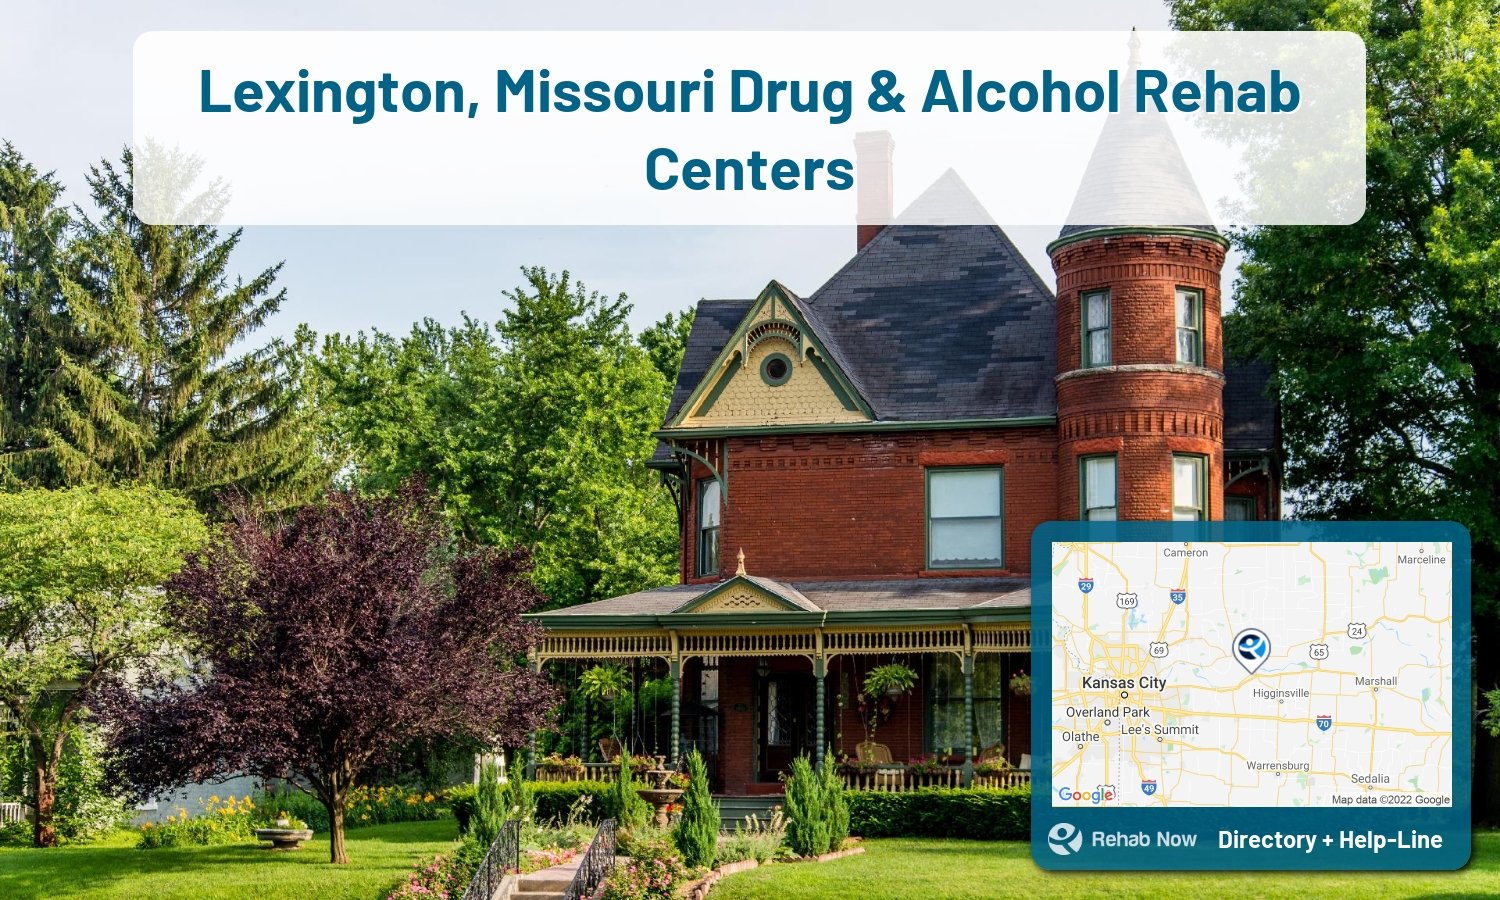 View options, availability, treatment methods, and more, for drug rehab and alcohol treatment in Lexington, Missouri